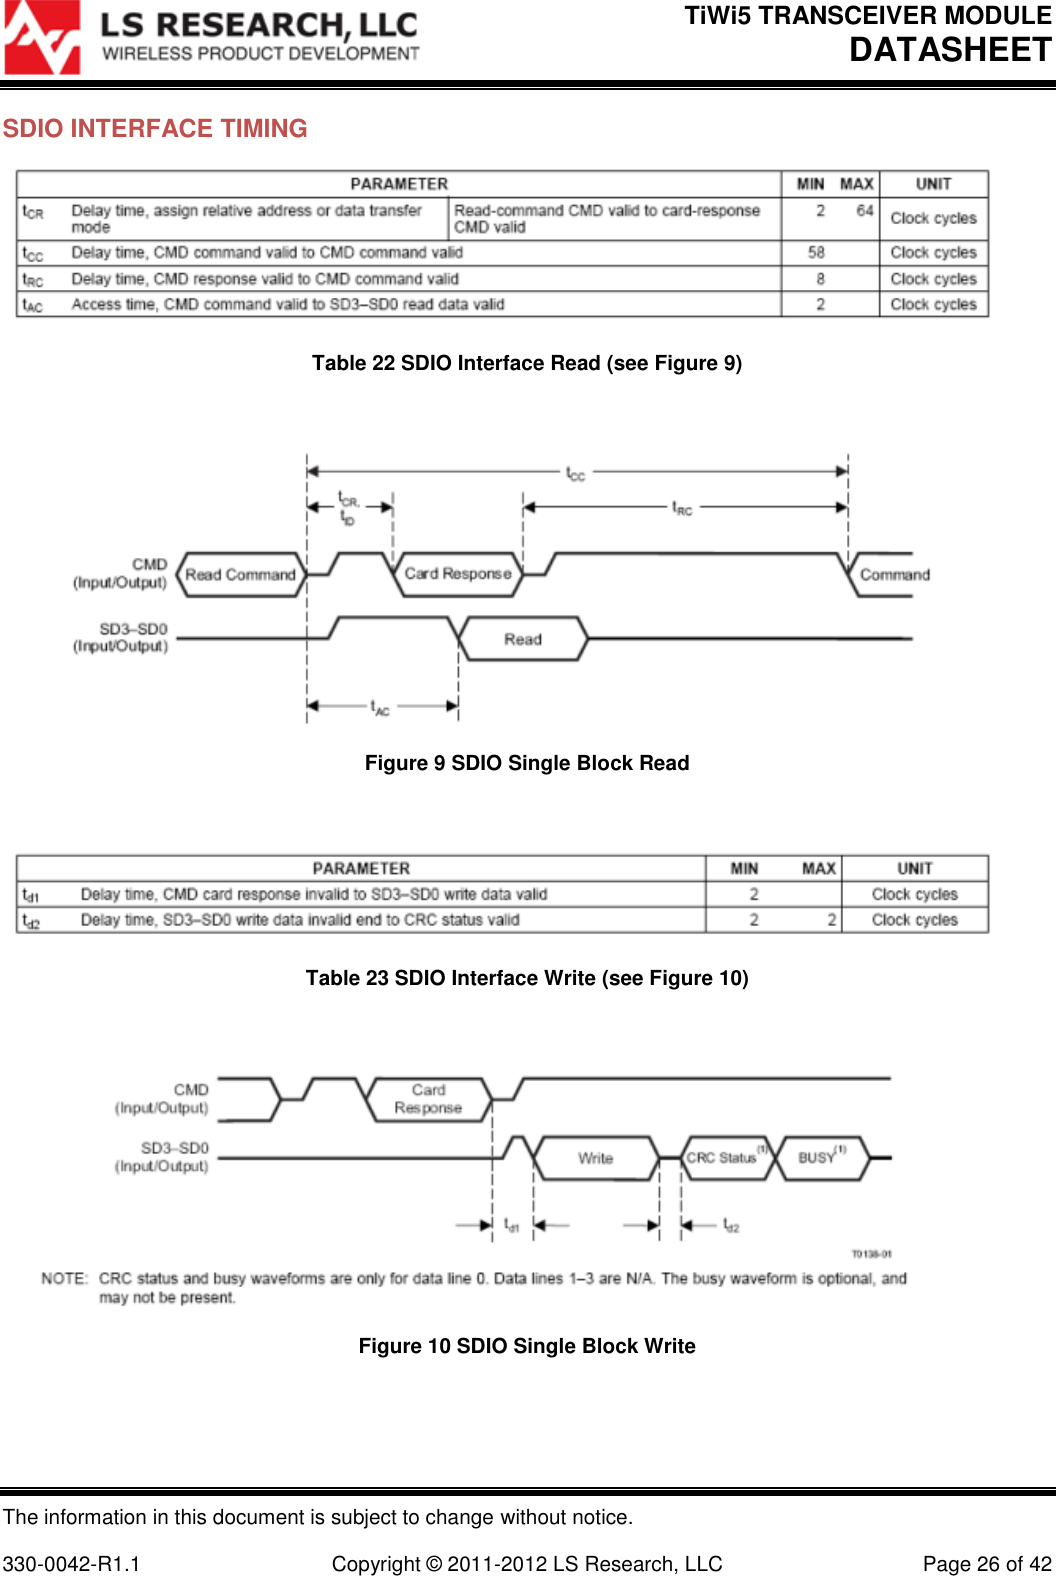 TiWi5 TRANSCEIVER MODULE DATASHEET  The information in this document is subject to change without notice.  330-0042-R1.1    Copyright © 2011-2012 LS Research, LLC  Page 26 of 42 SDIO INTERFACE TIMING  Table 22 SDIO Interface Read (see Figure 9)   Figure 9 SDIO Single Block Read   Table 23 SDIO Interface Write (see Figure 10)   Figure 10 SDIO Single Block Write   